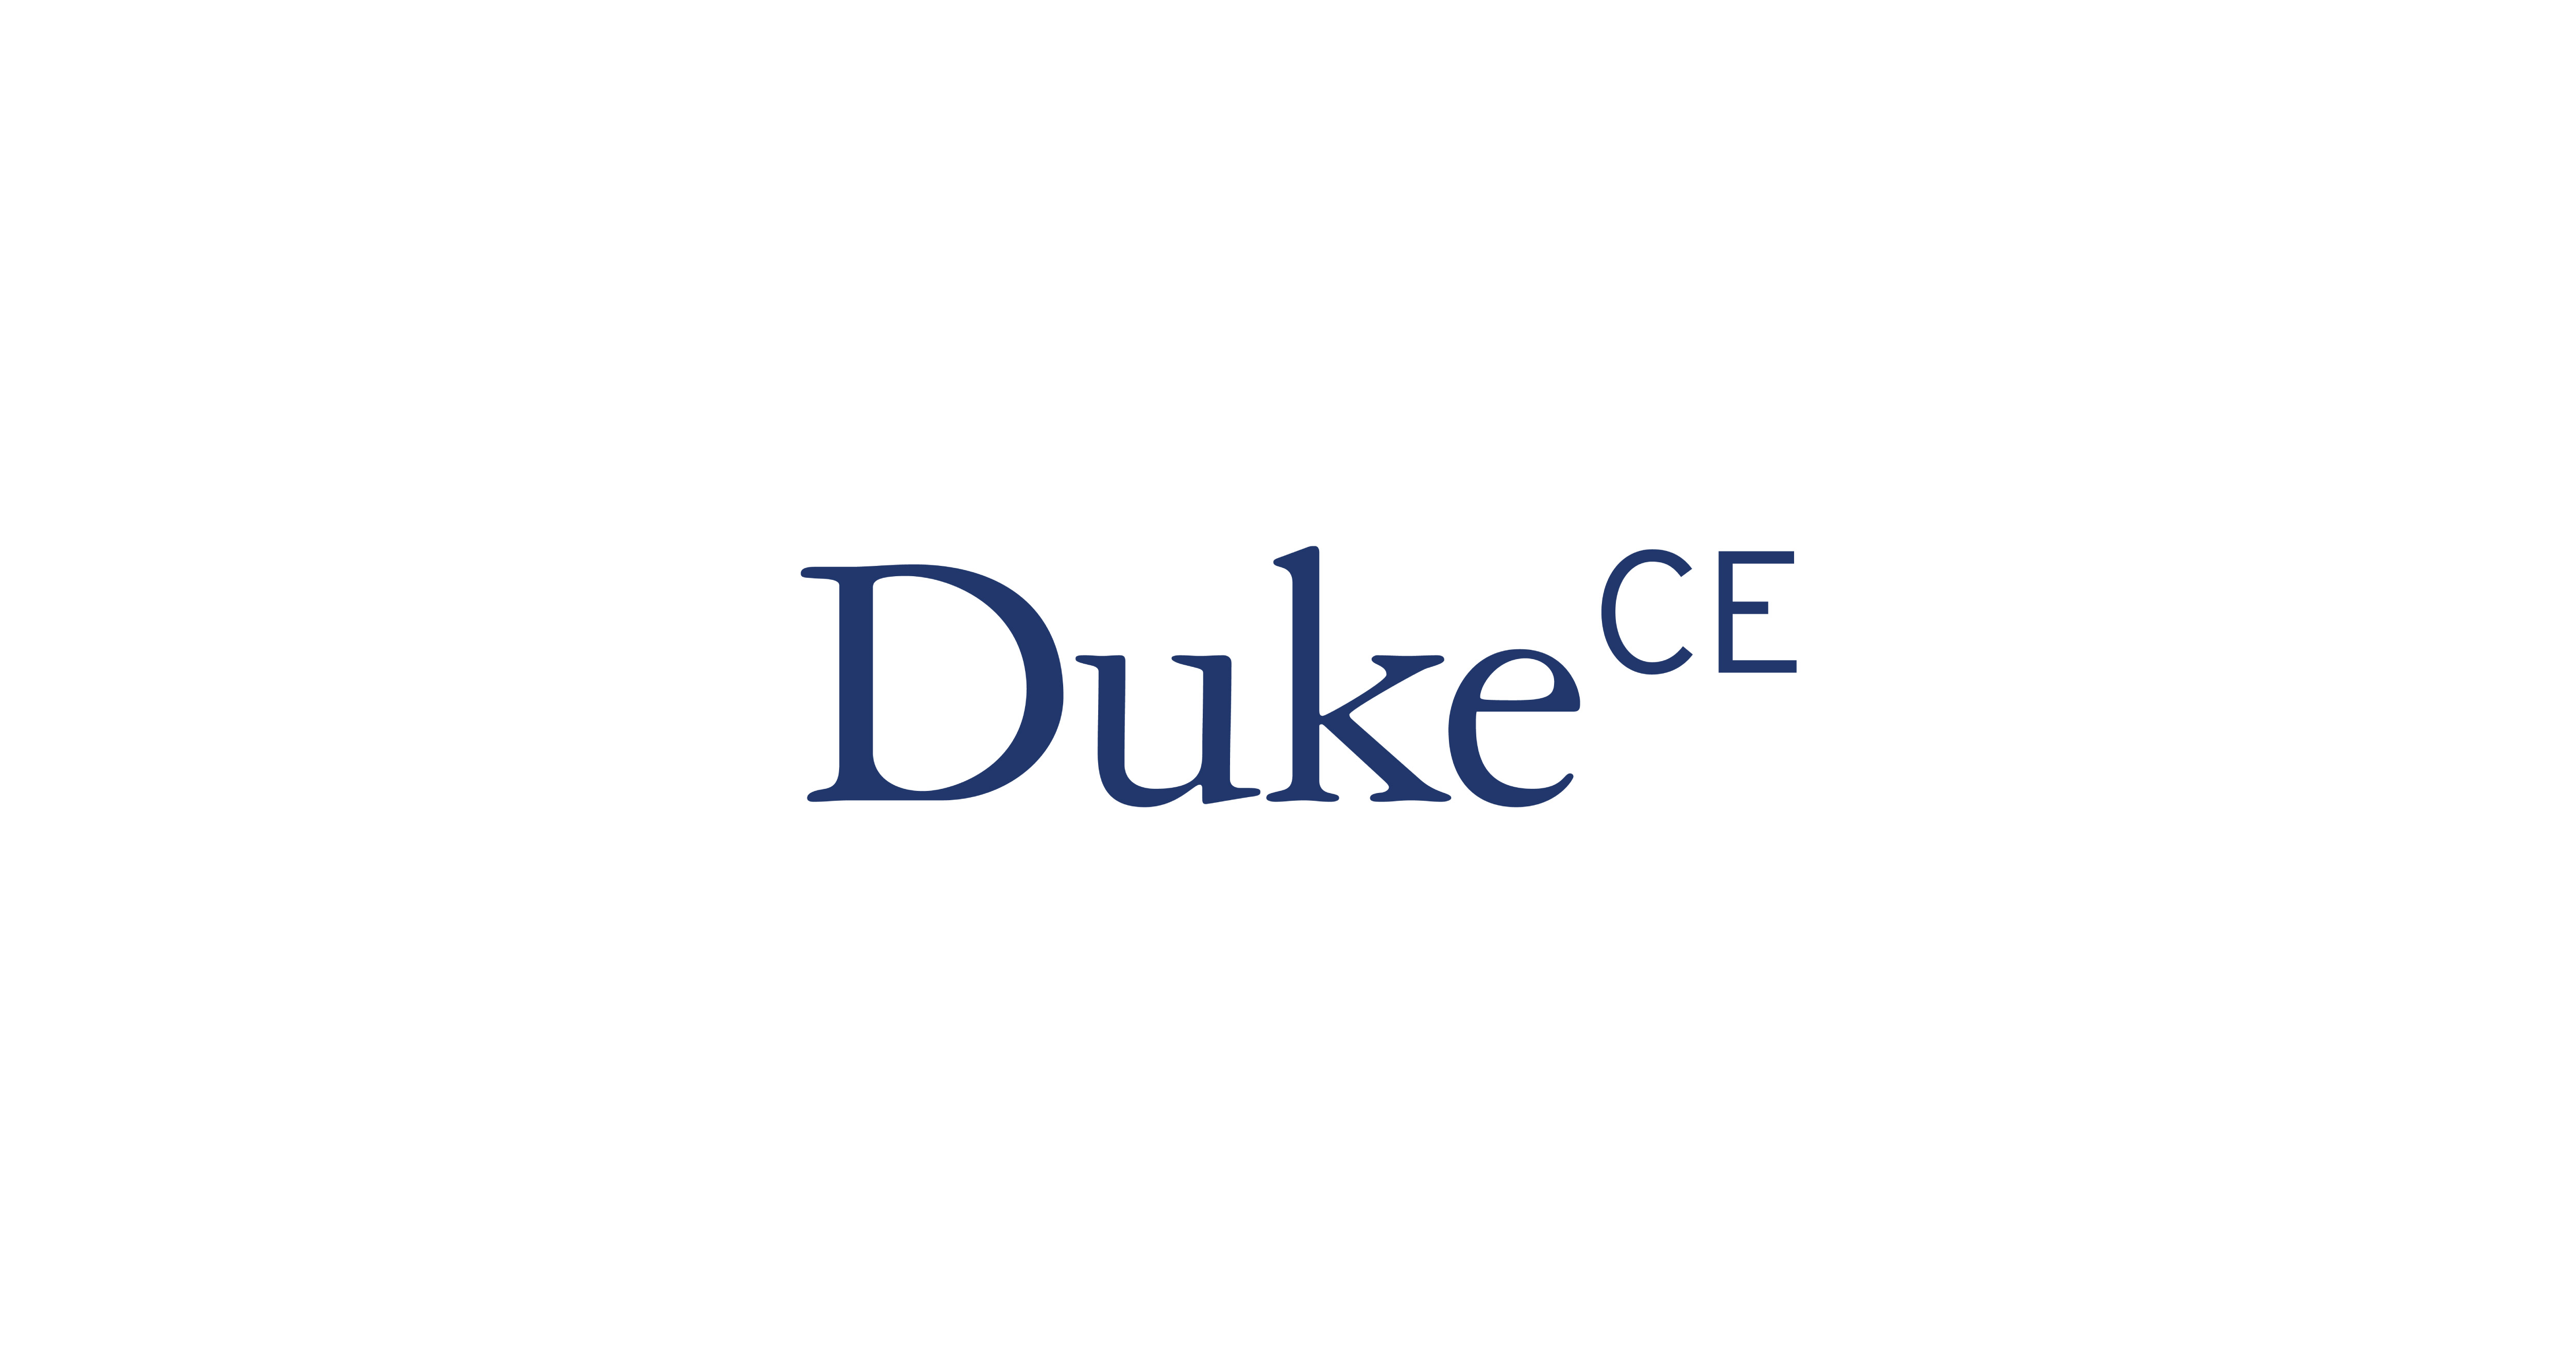 Online leadership program for nurses launched by Duke CE and OpusVi